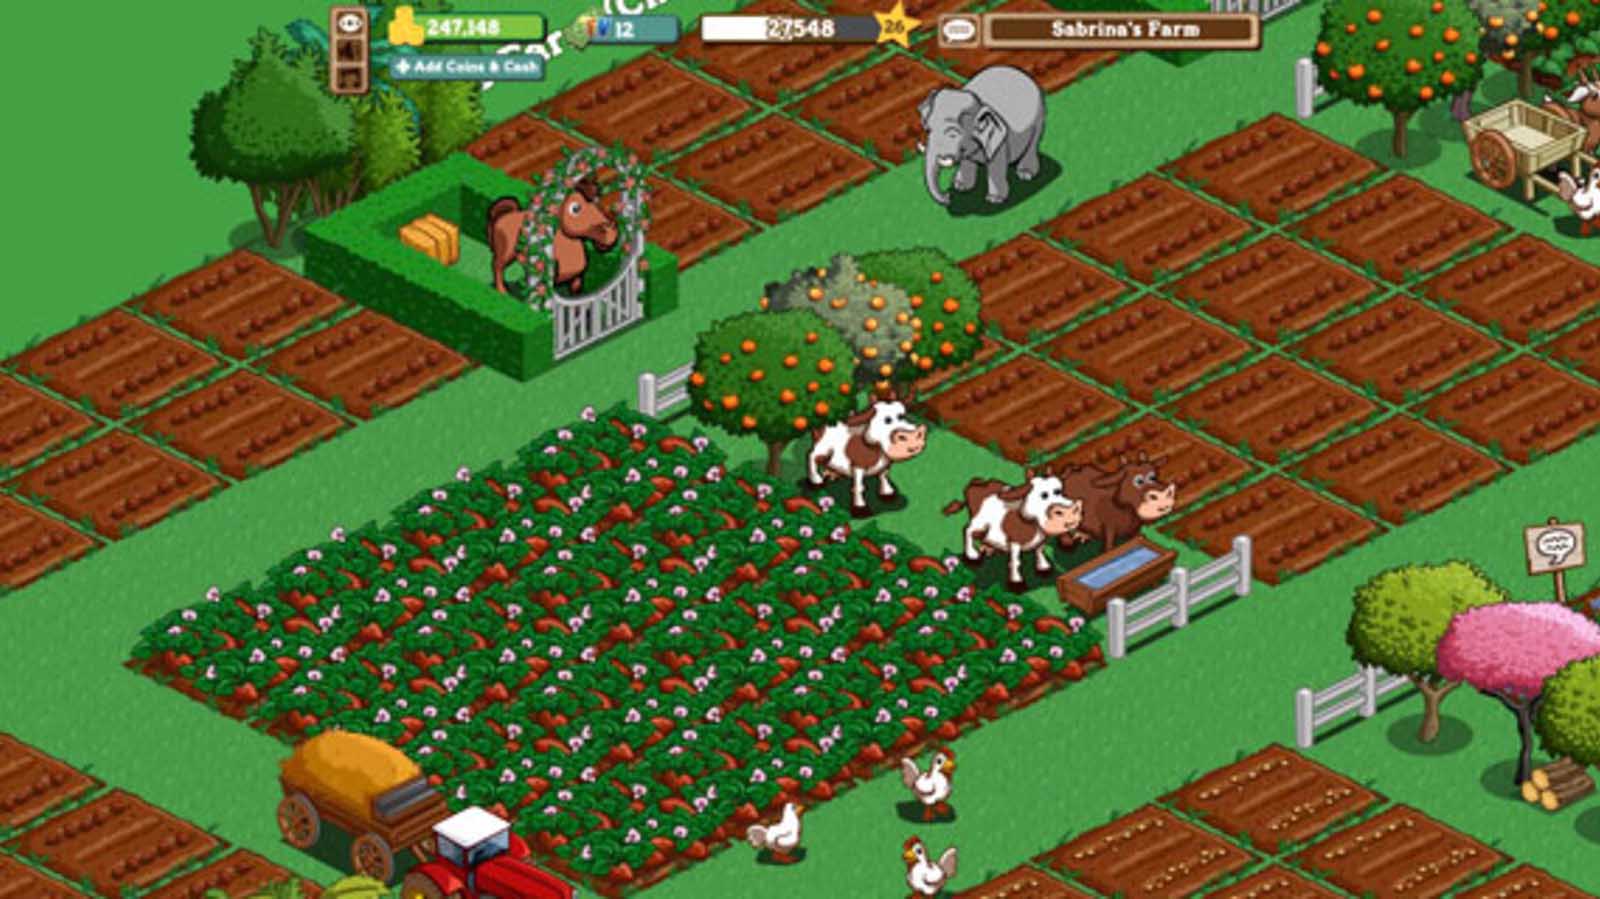 'Farmville' was once the top game on Facebook, but the game finally shut down December 31st. Relive the iconic farming game that swept the nation.